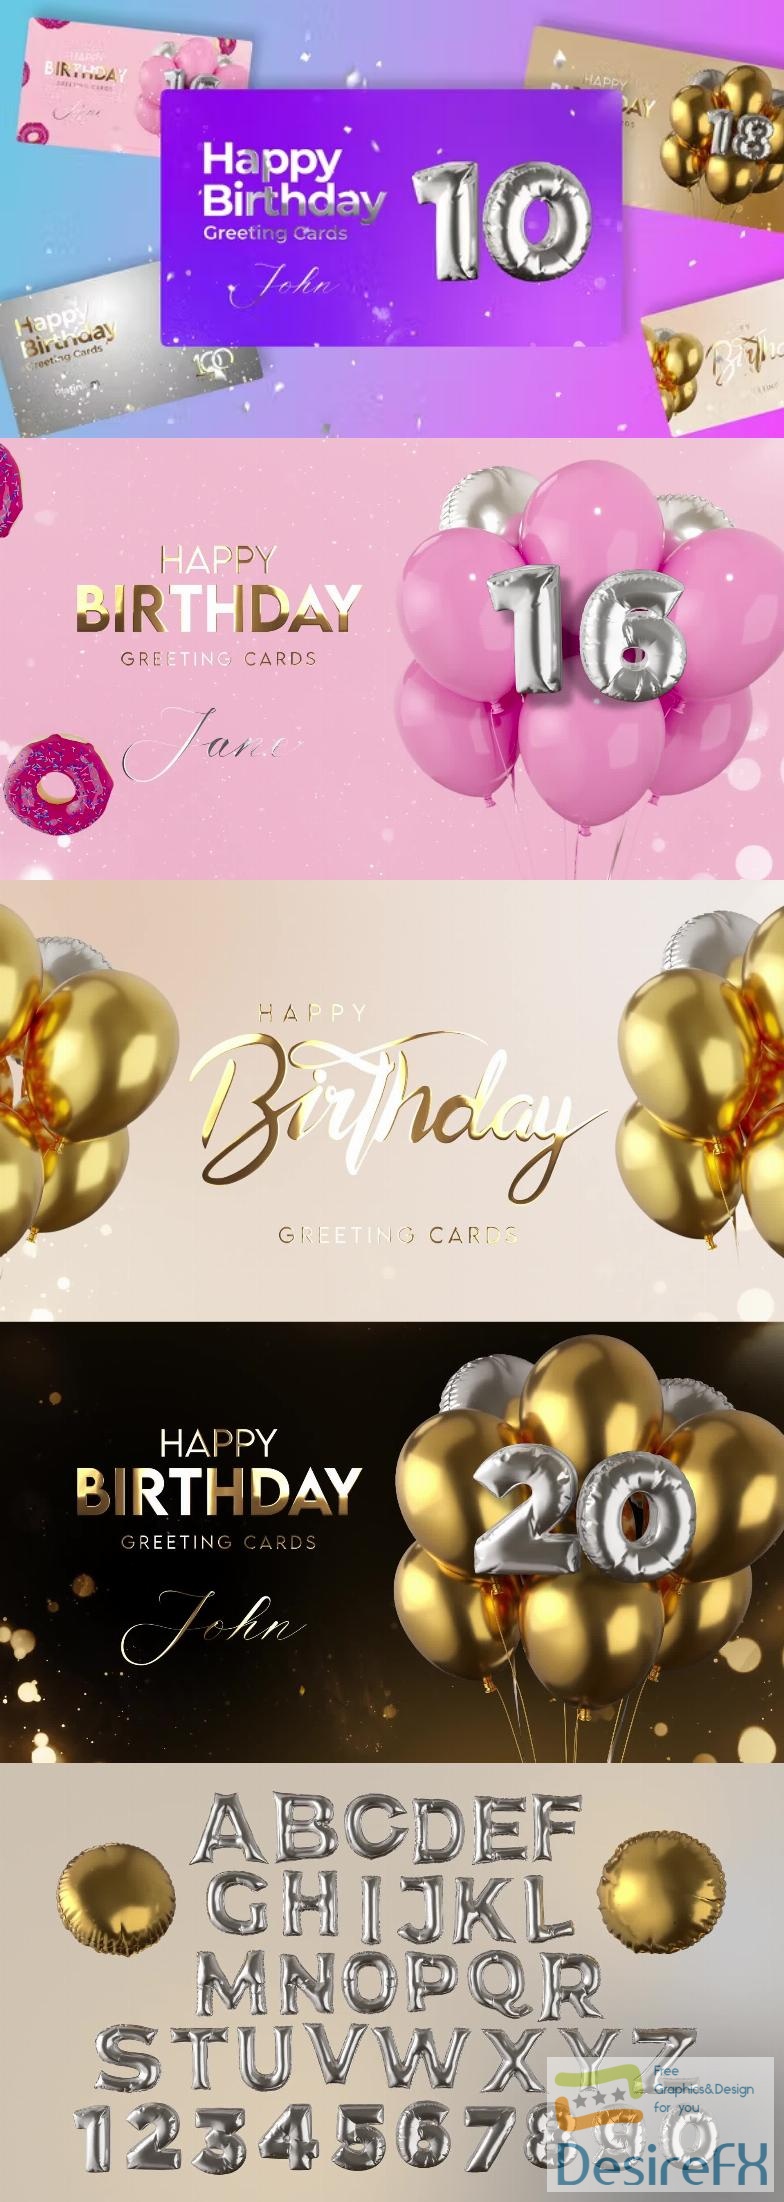 Videohive Happy Birthday Greeting Cards 40194402